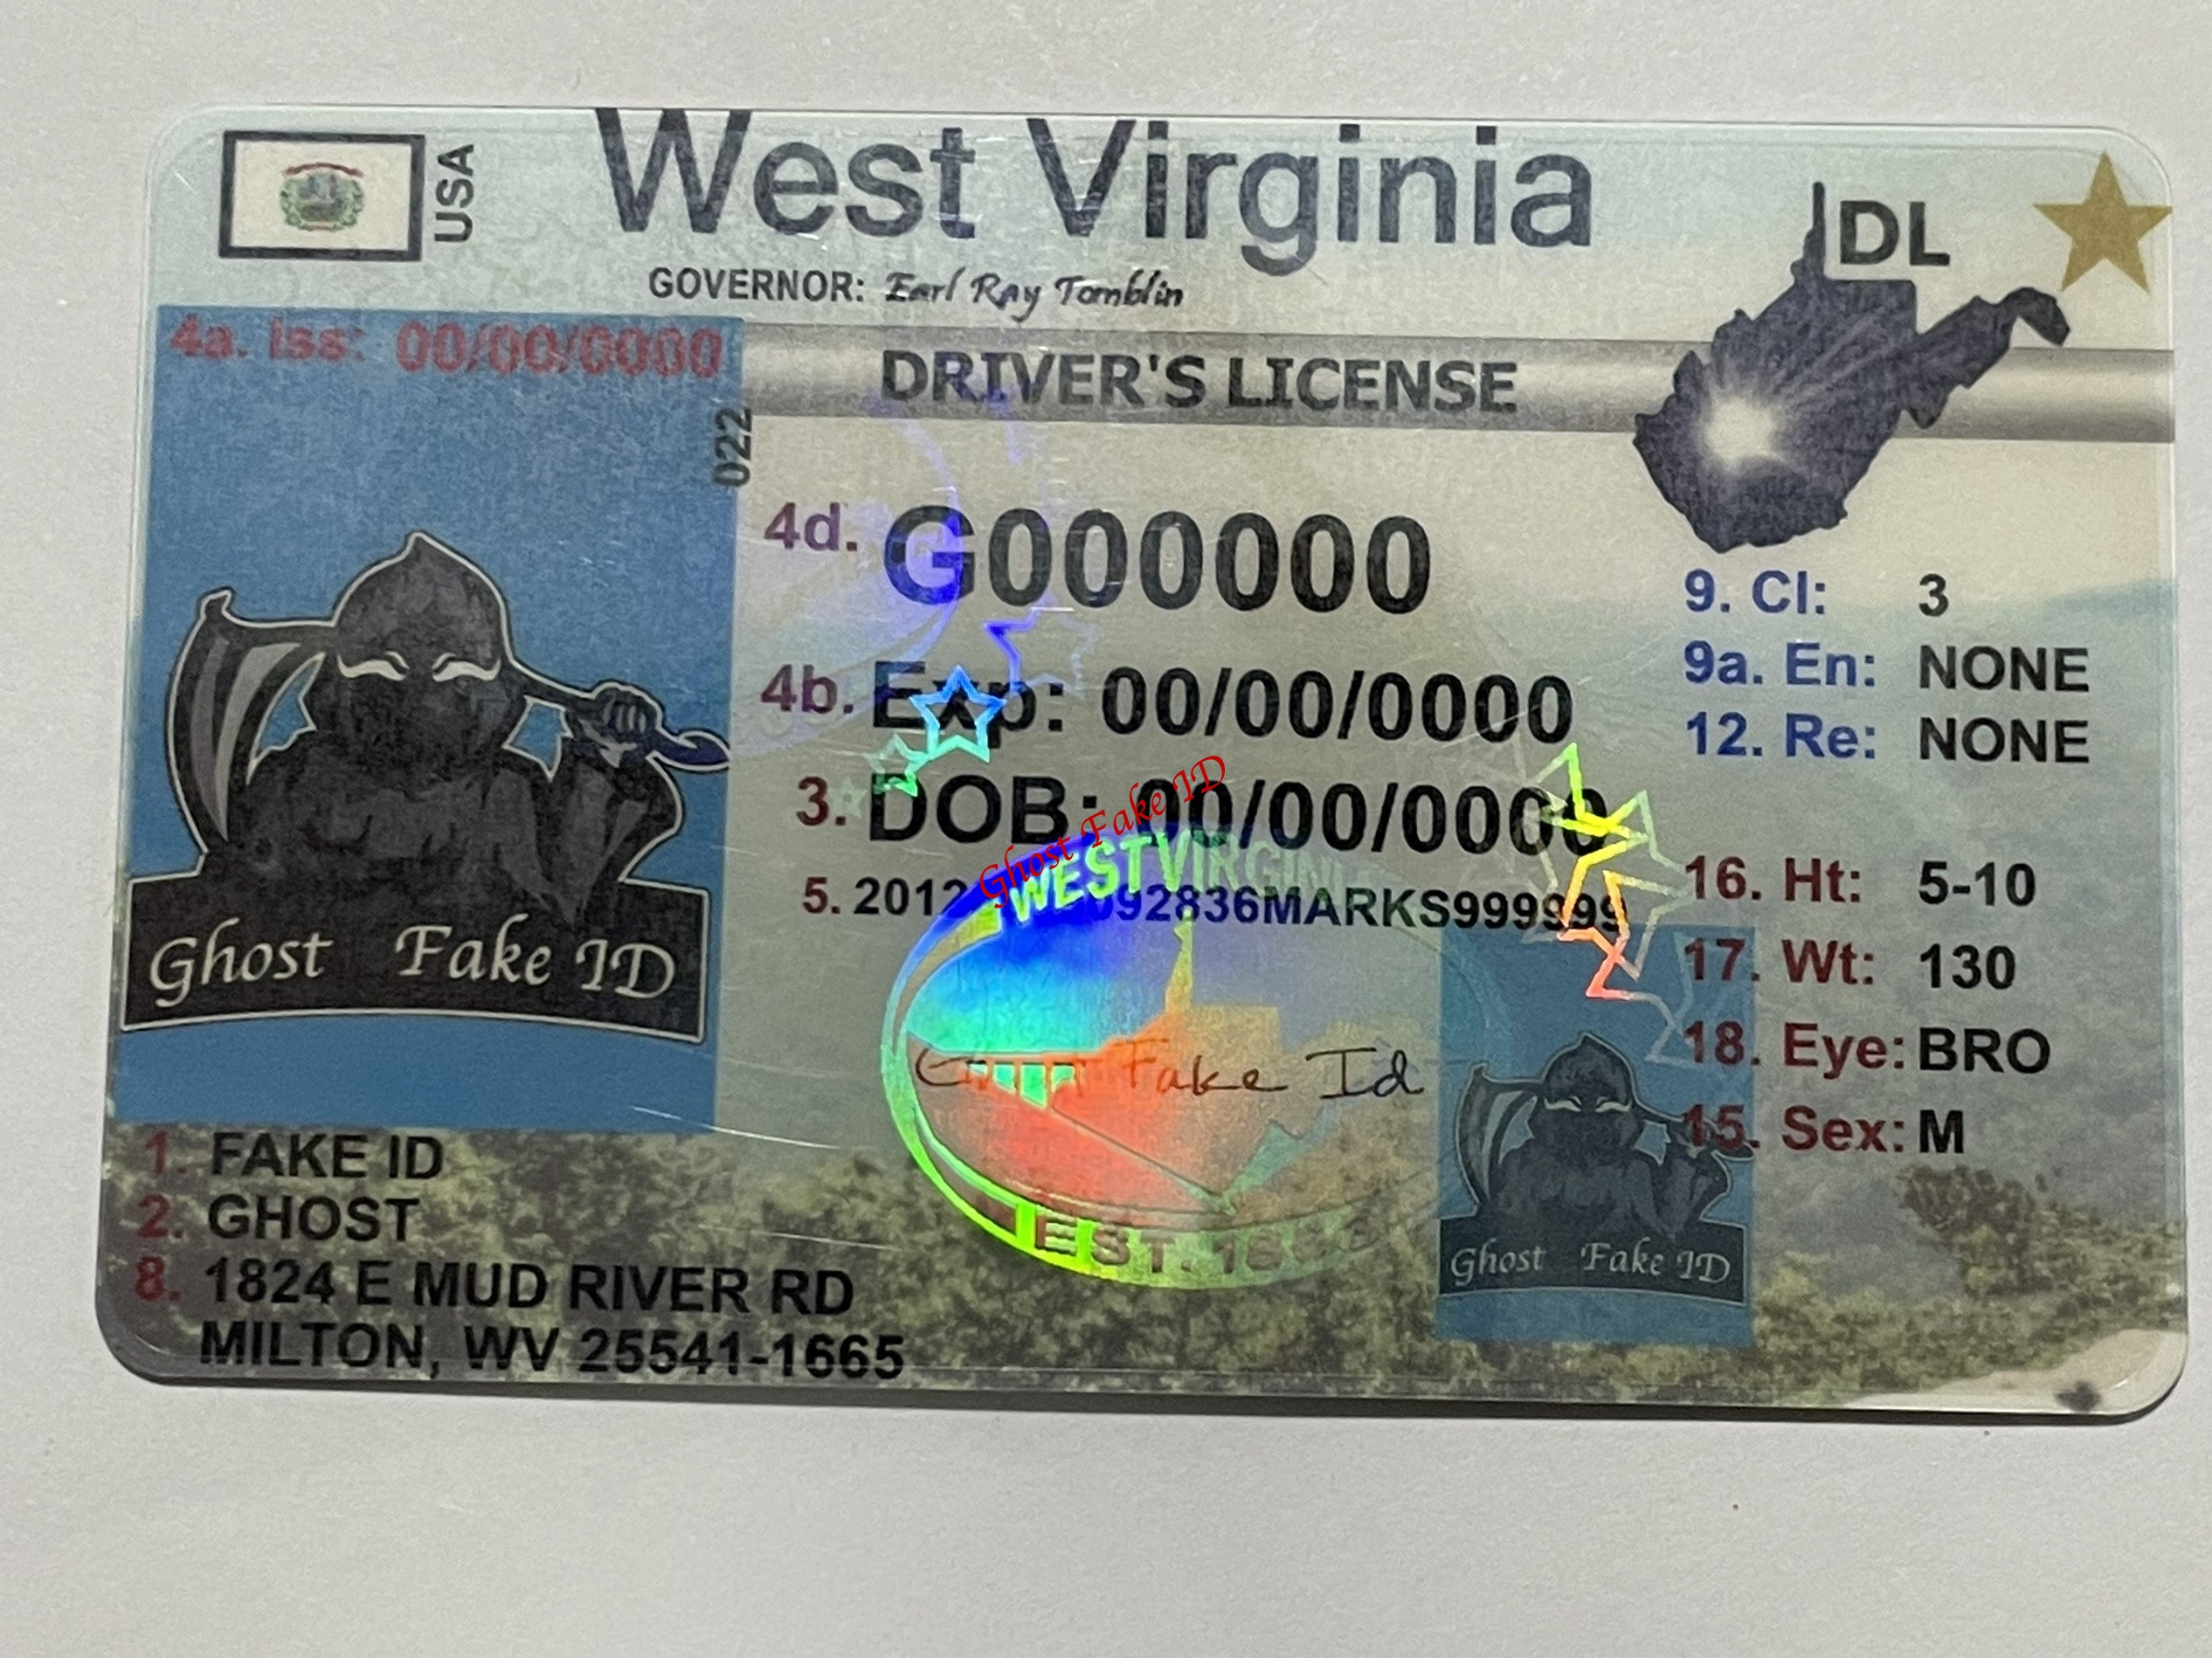 West Virginia - Scanable fake id